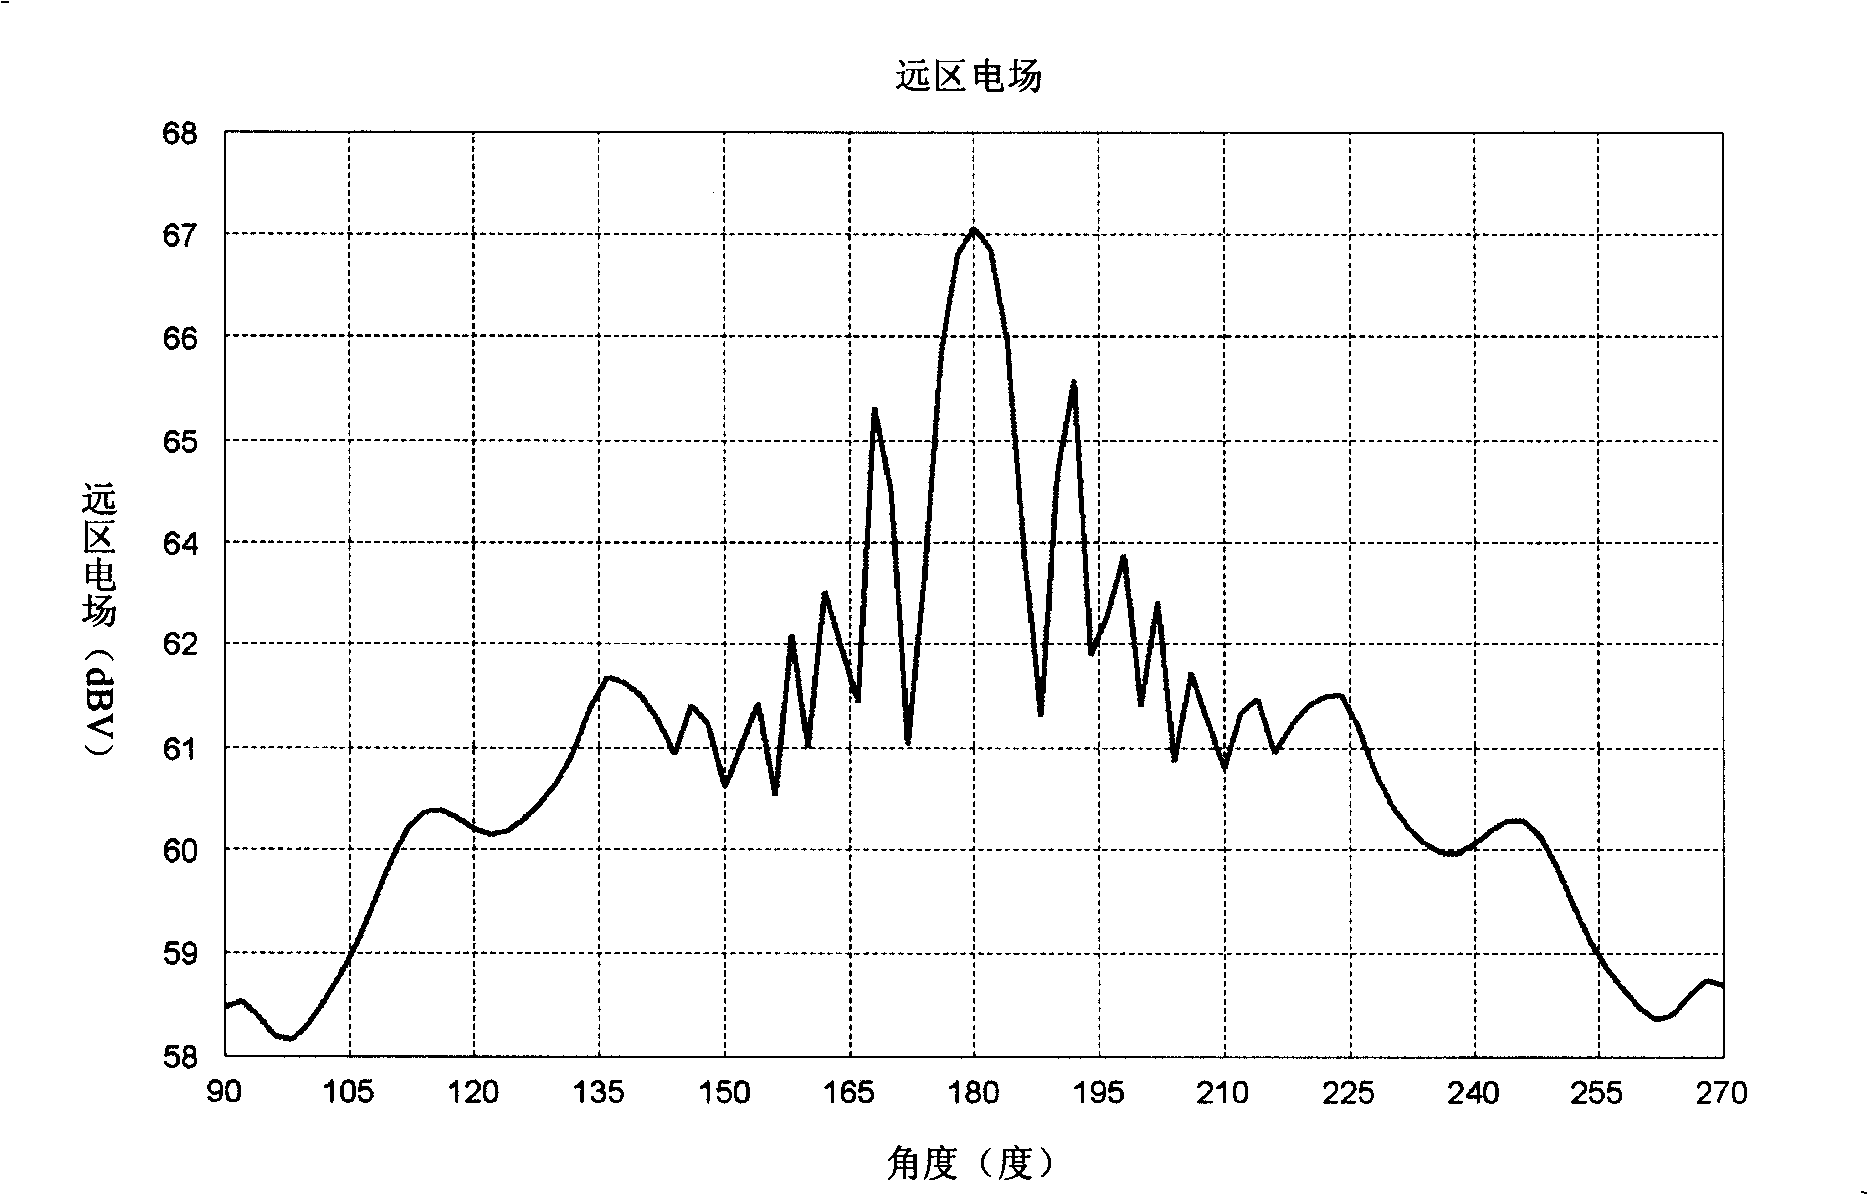 Method for dividing electromechanical synthetic graticule of double-reflecting plane antenna system